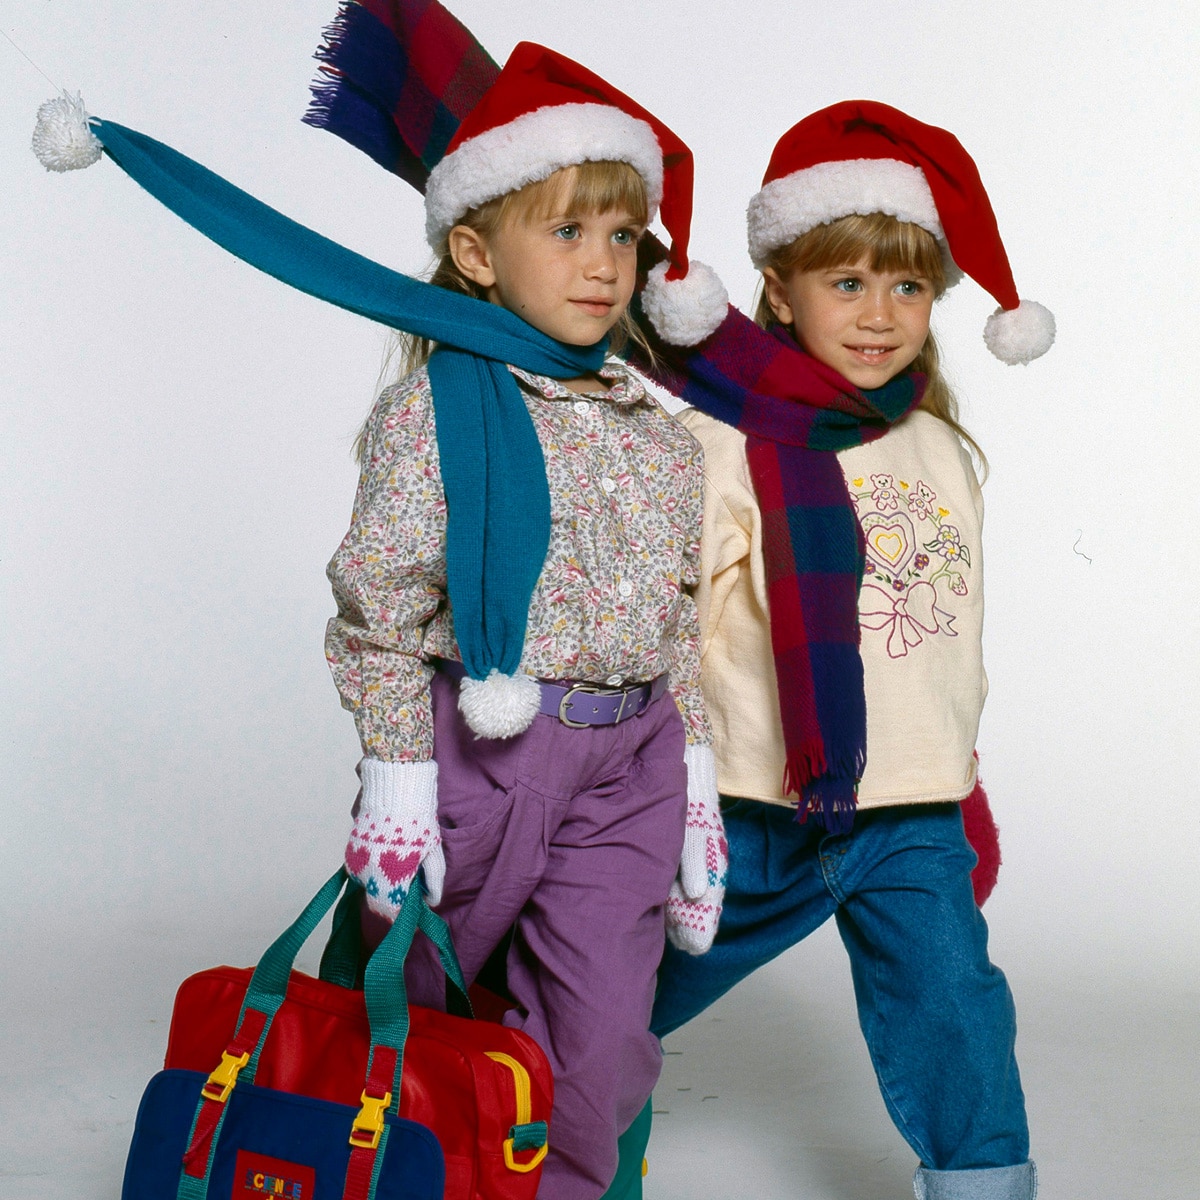 Olsen Twins, To Grandmother's House We Go